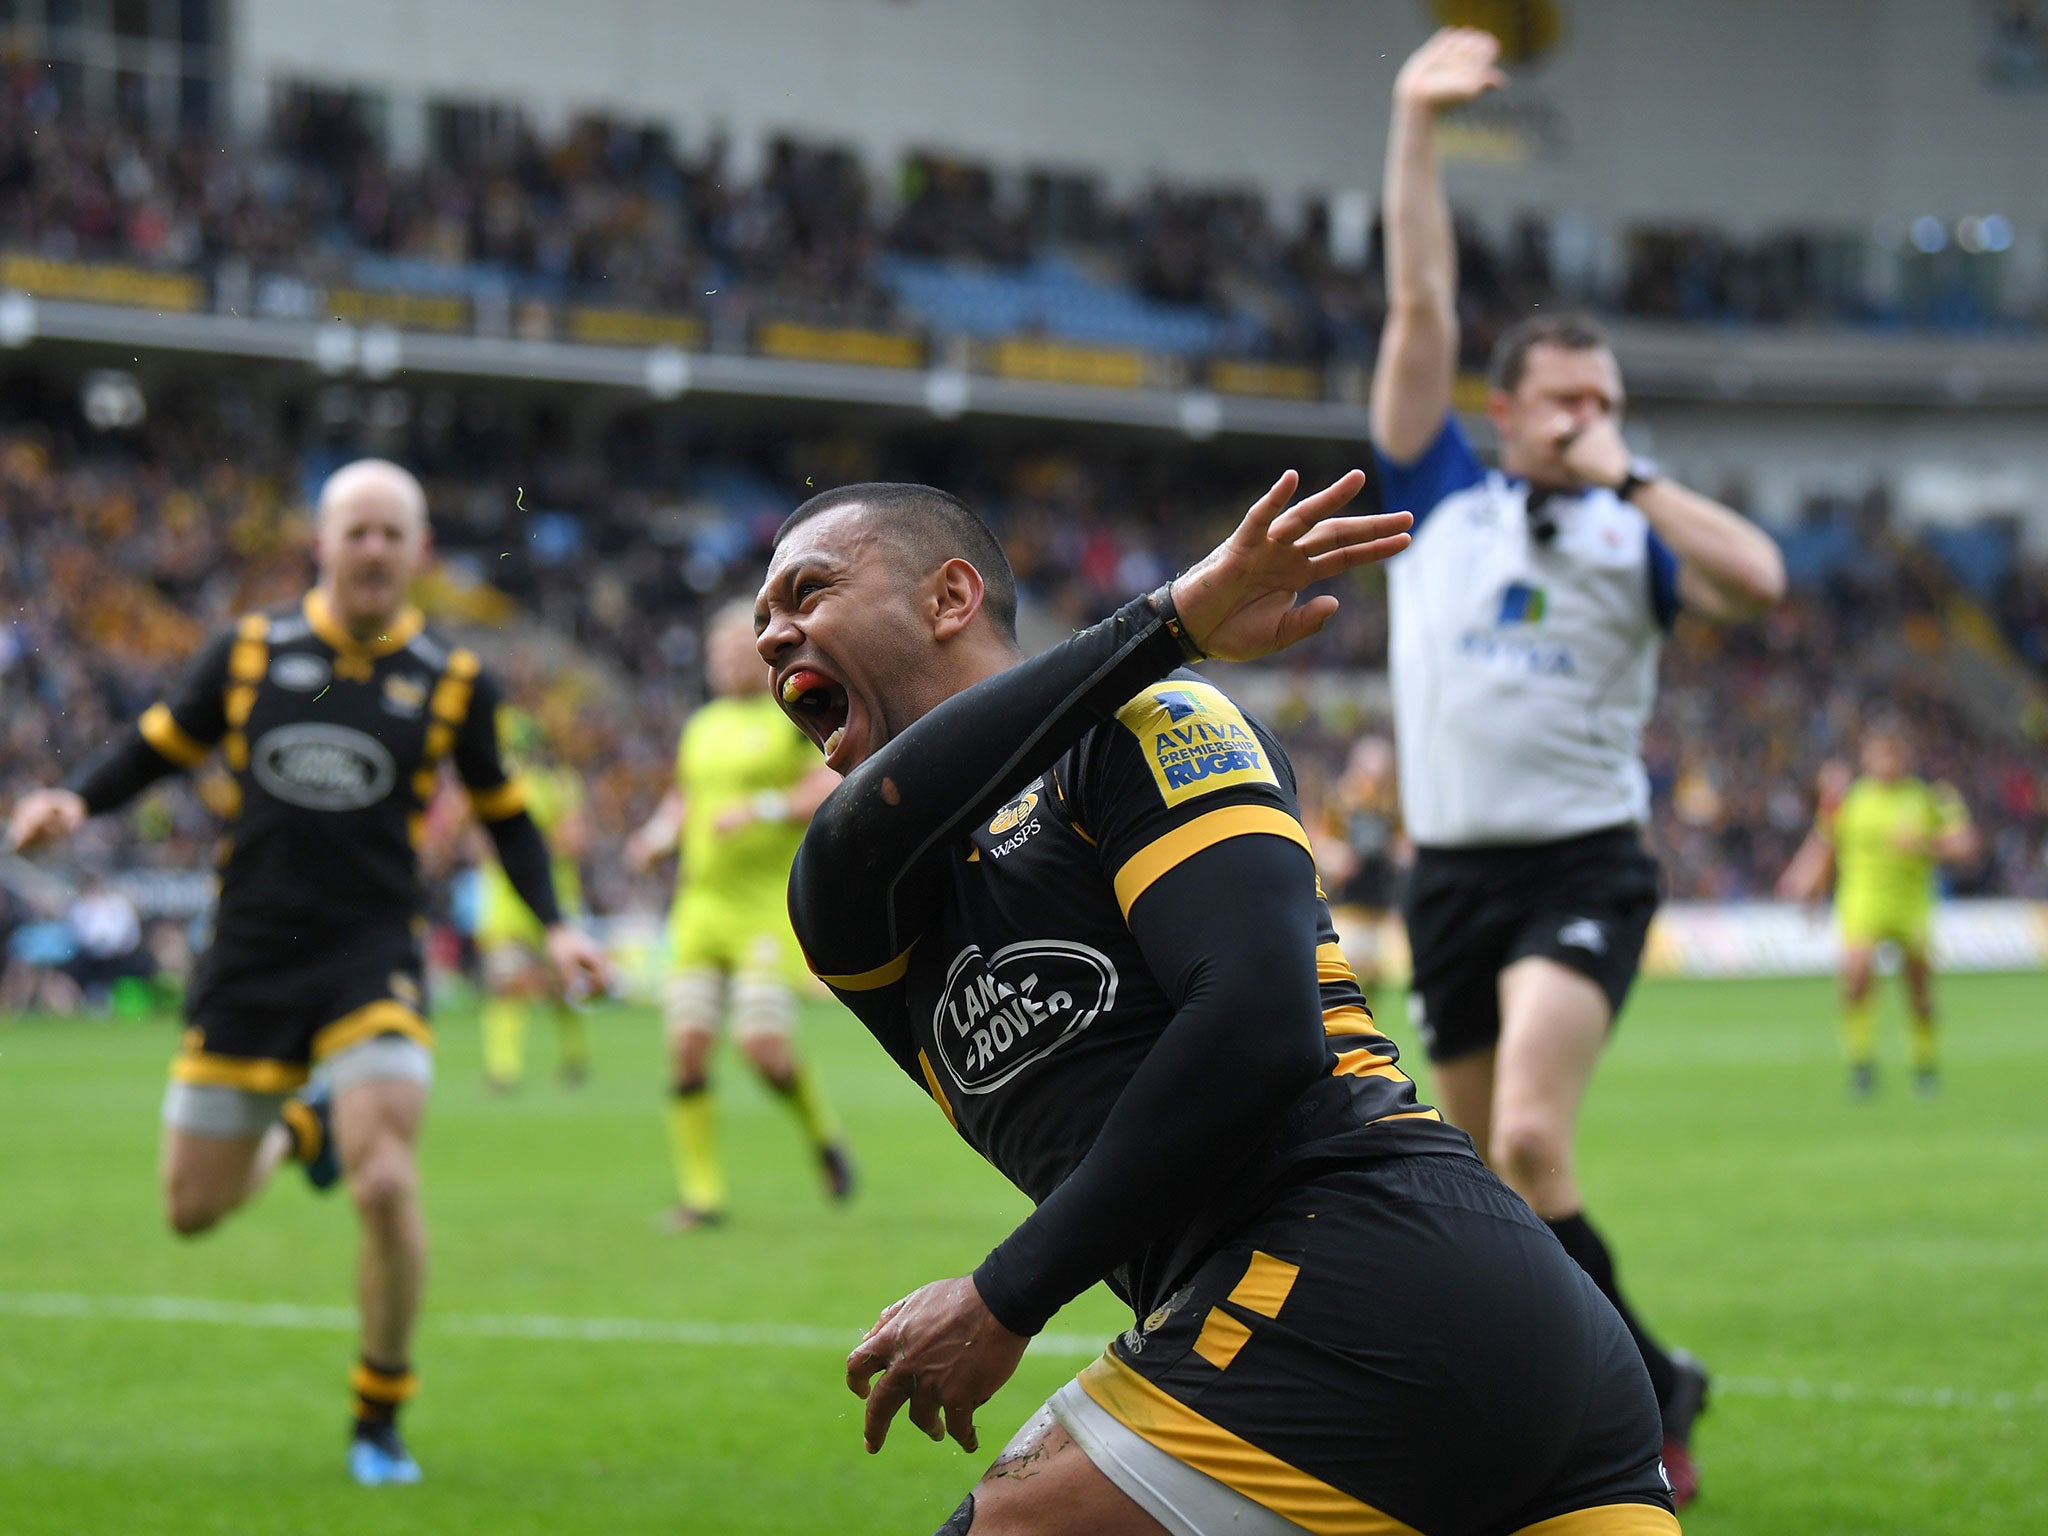 Wasps reached their first Premiership final in nine years